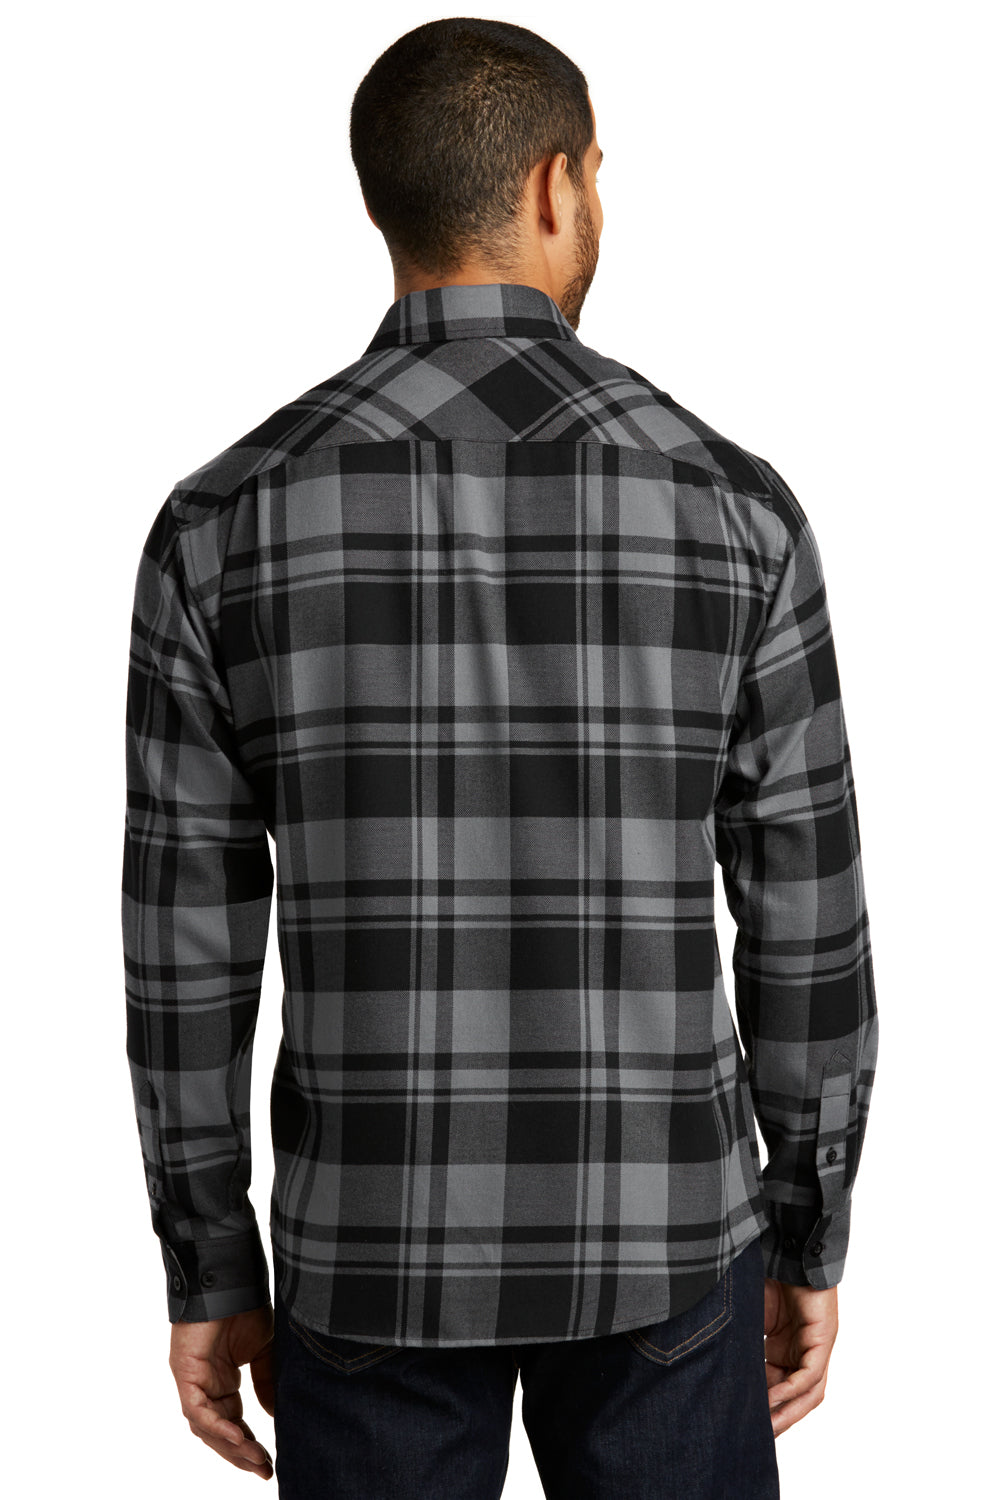 Port Authority W668 Mens Flannel Long Sleeve Button Down Shirt w/ Double Pockets Grey/Black Back